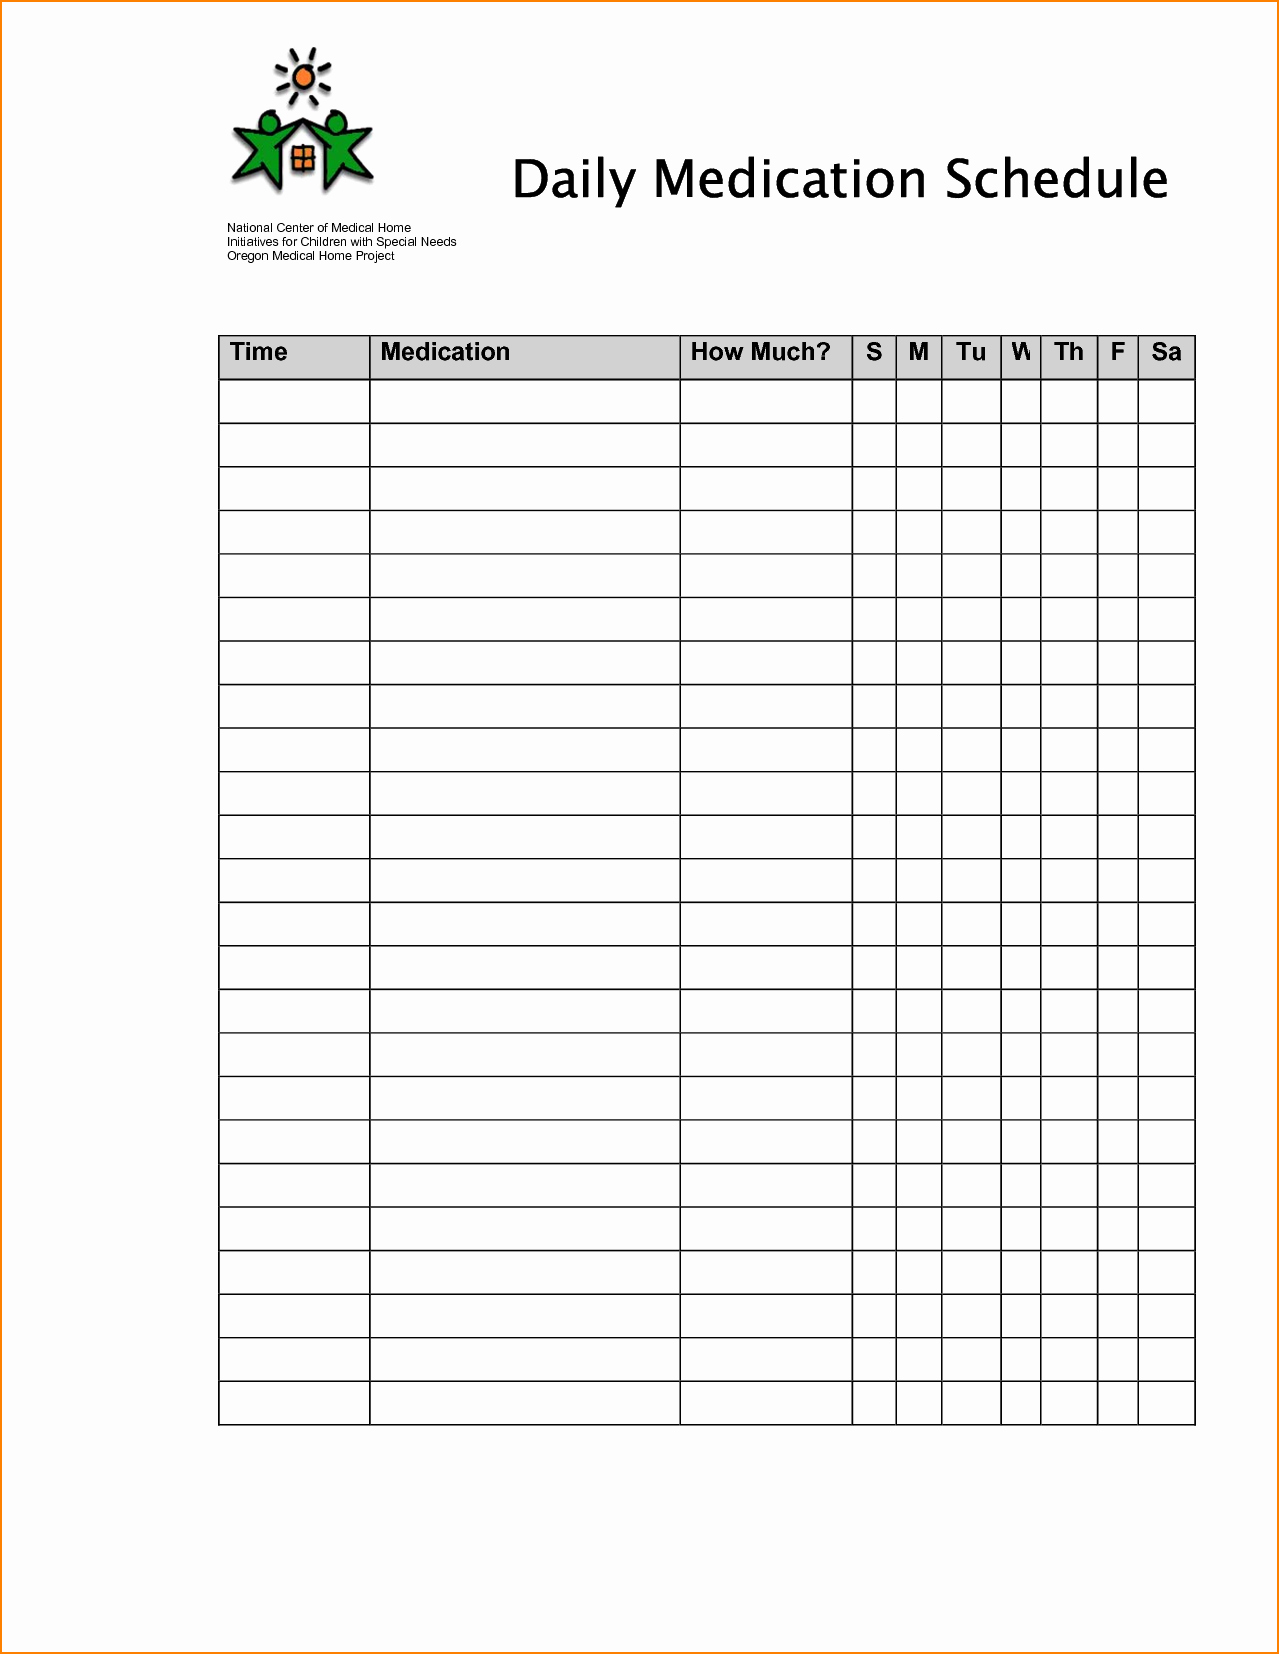 Medication Schedule Template Excel Awesome Medication Schedule Template